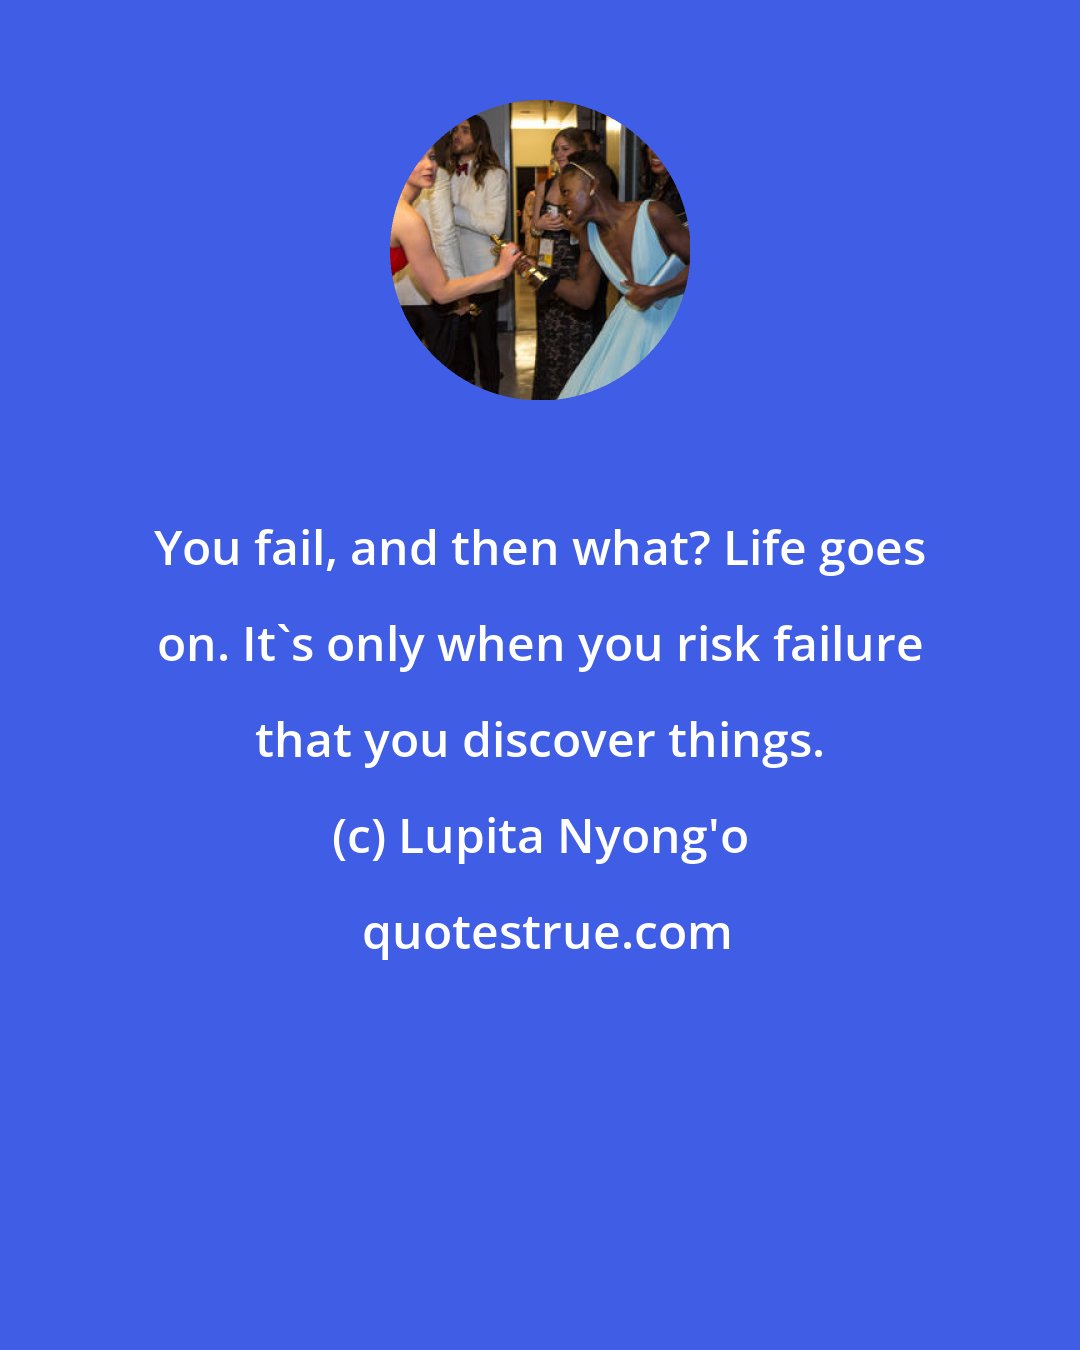 Lupita Nyong'o: You fail, and then what? Life goes on. It's only when you risk failure that you discover things.